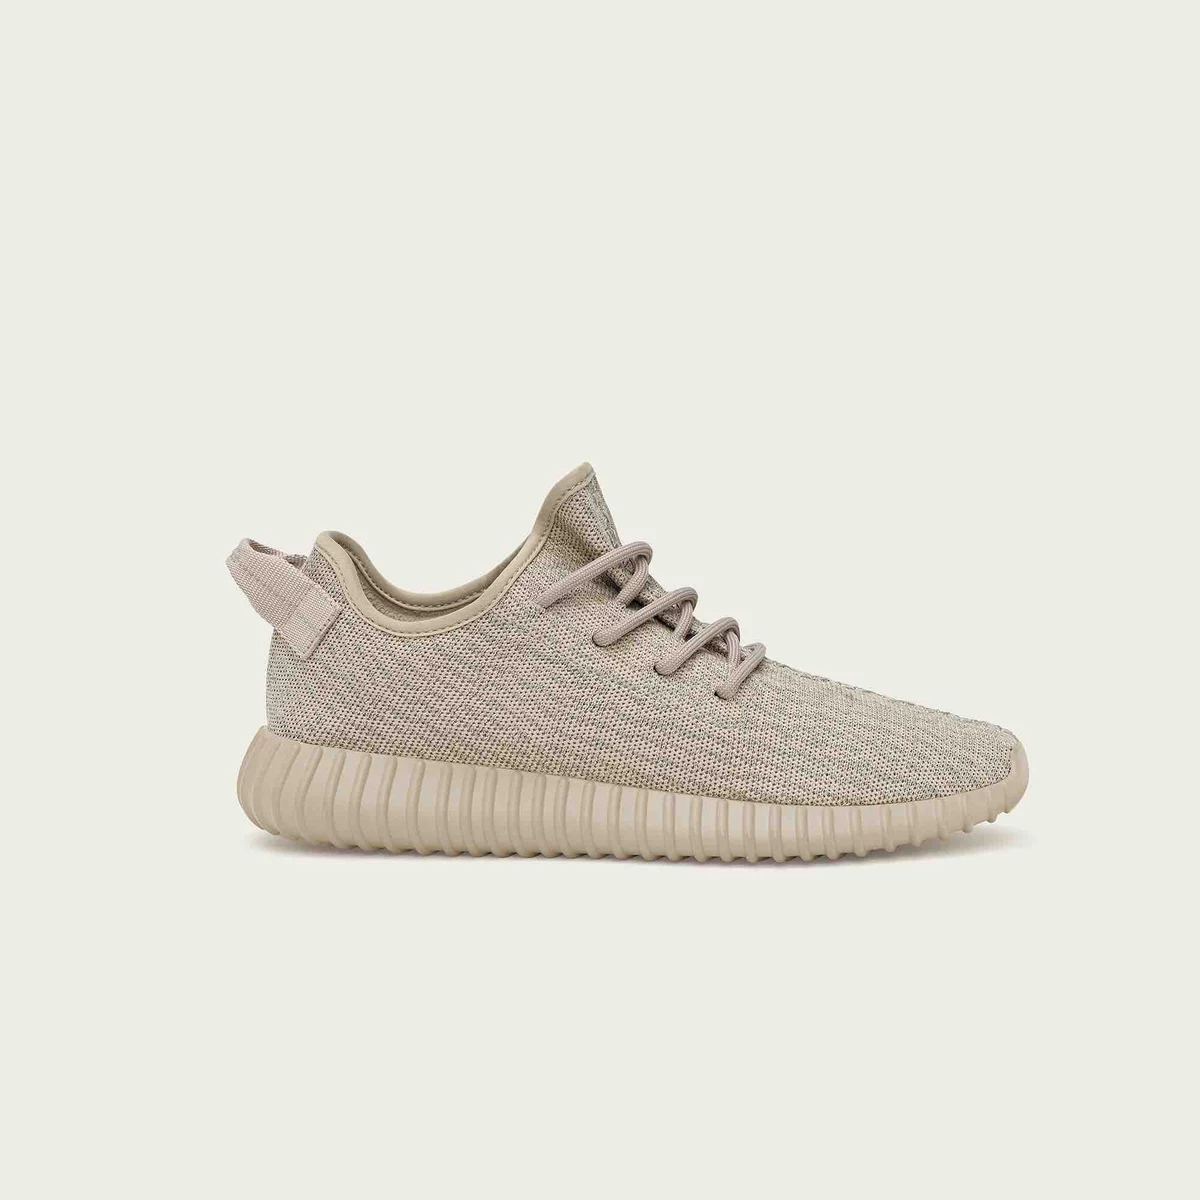 Here's Where You Can Get the Tan Adidas Yeezy Boost 350s - XXL